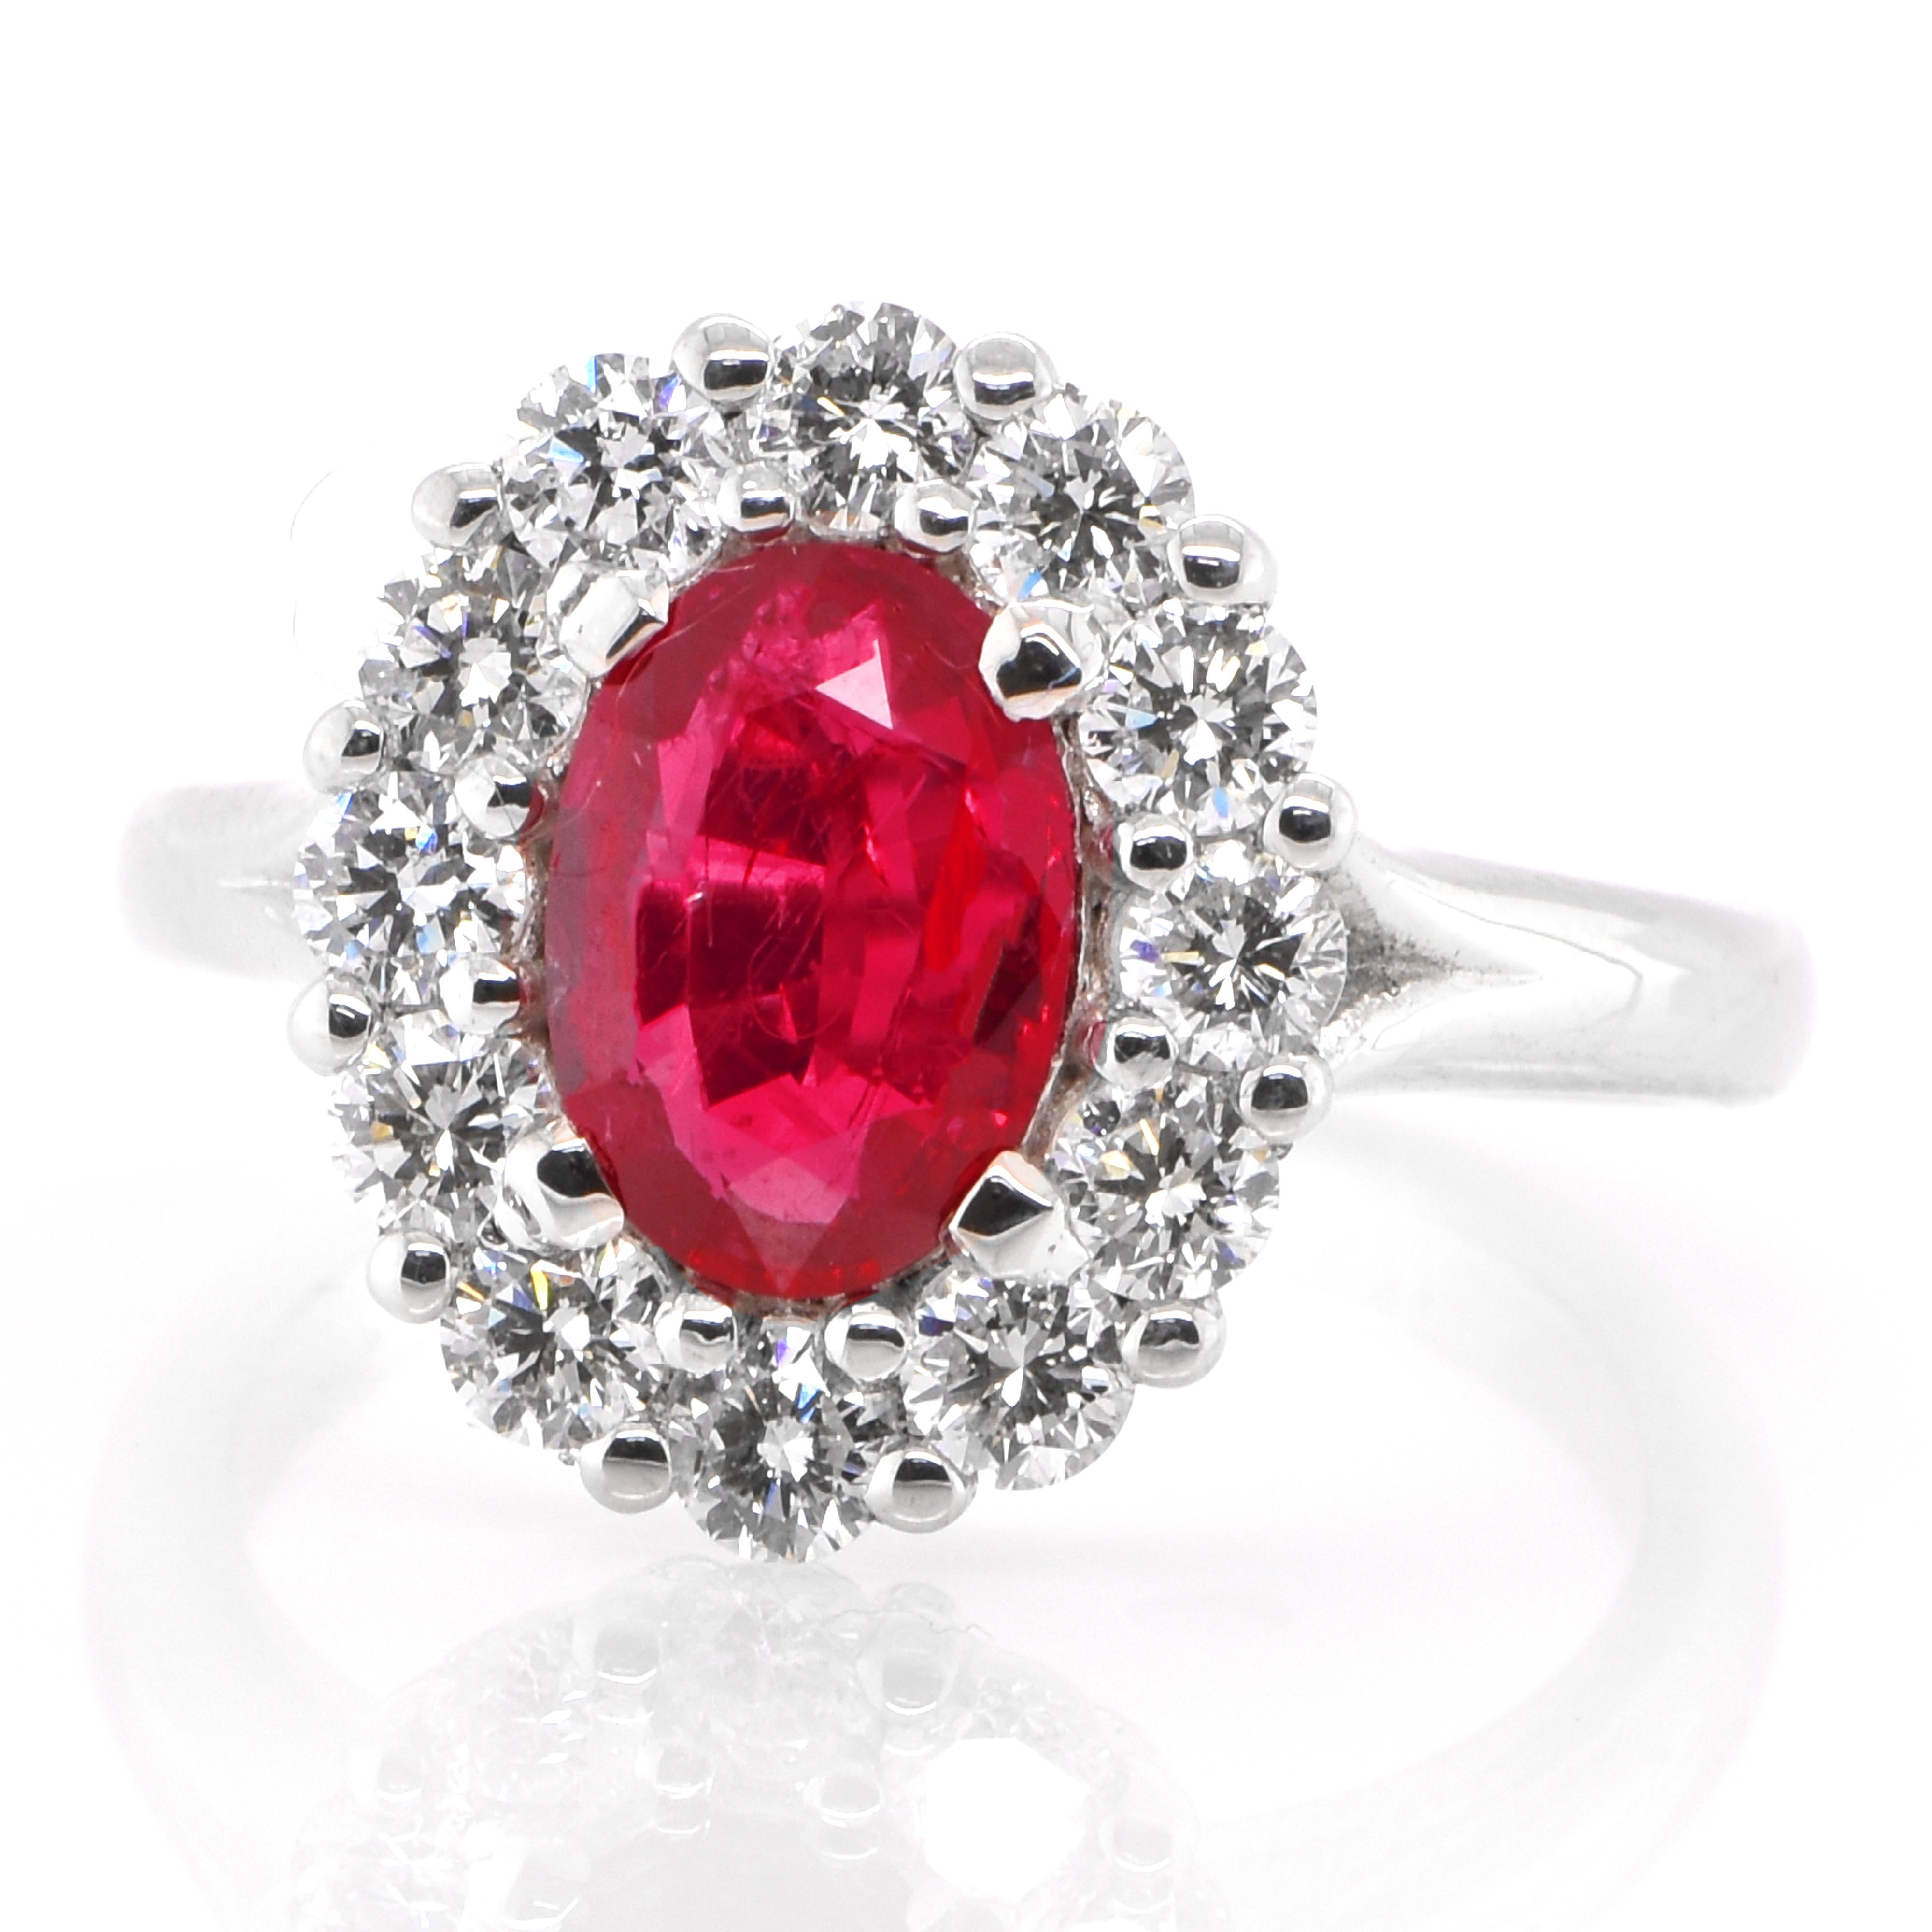 A beautiful ring set in Platinum featuring a GRS Certified 1.51 Carat Natural Untreated, Pigeon's Blood Colored Ruby and 0.95 Carat Diamonds. Rubies are referred to as 